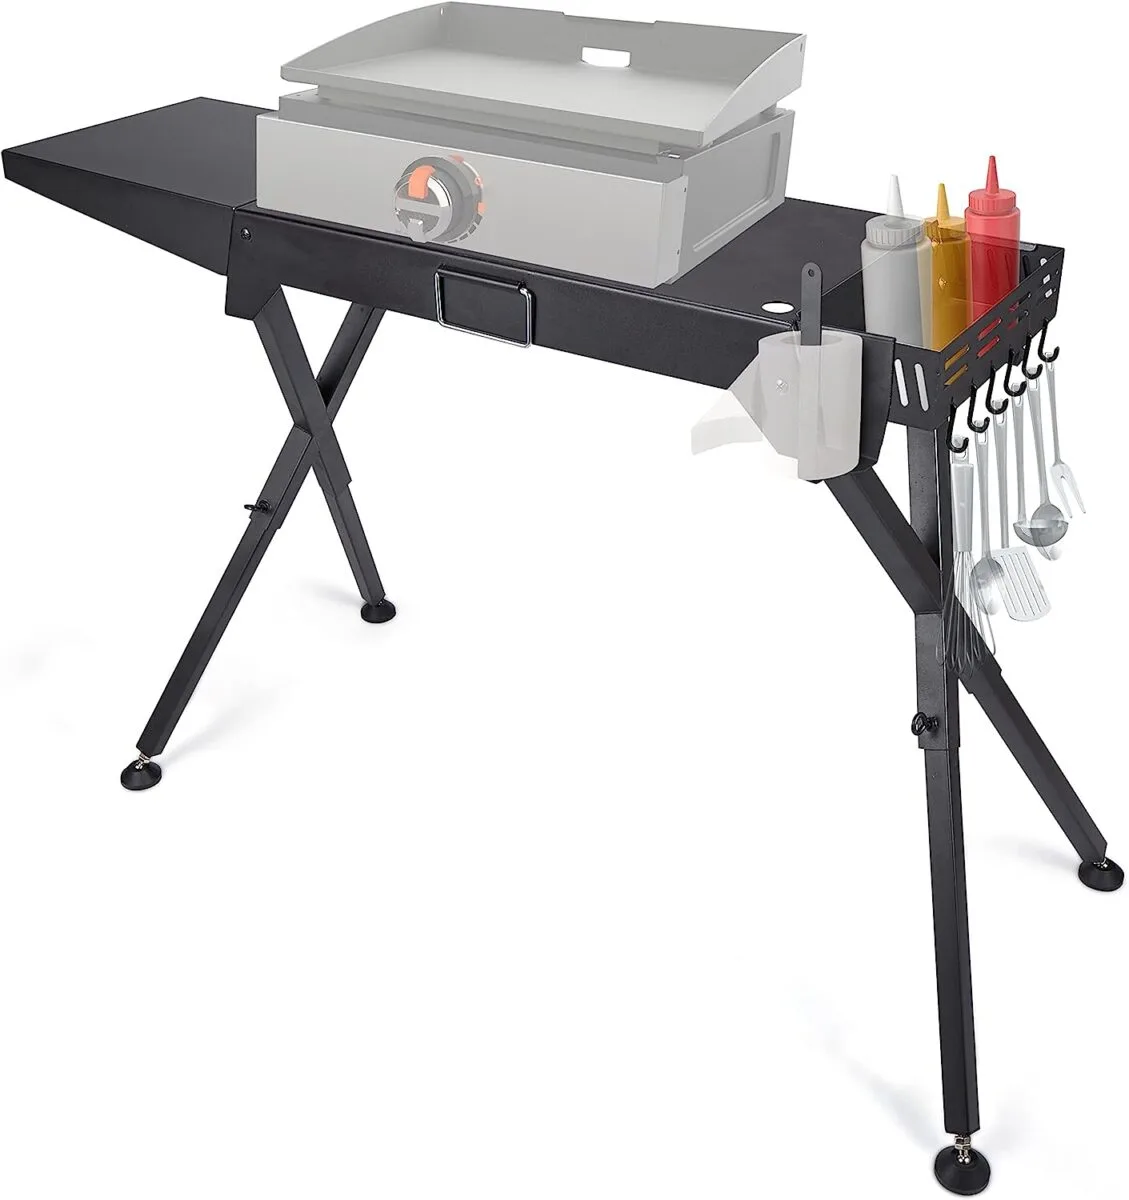 Portable Blackstone Griddle Stand